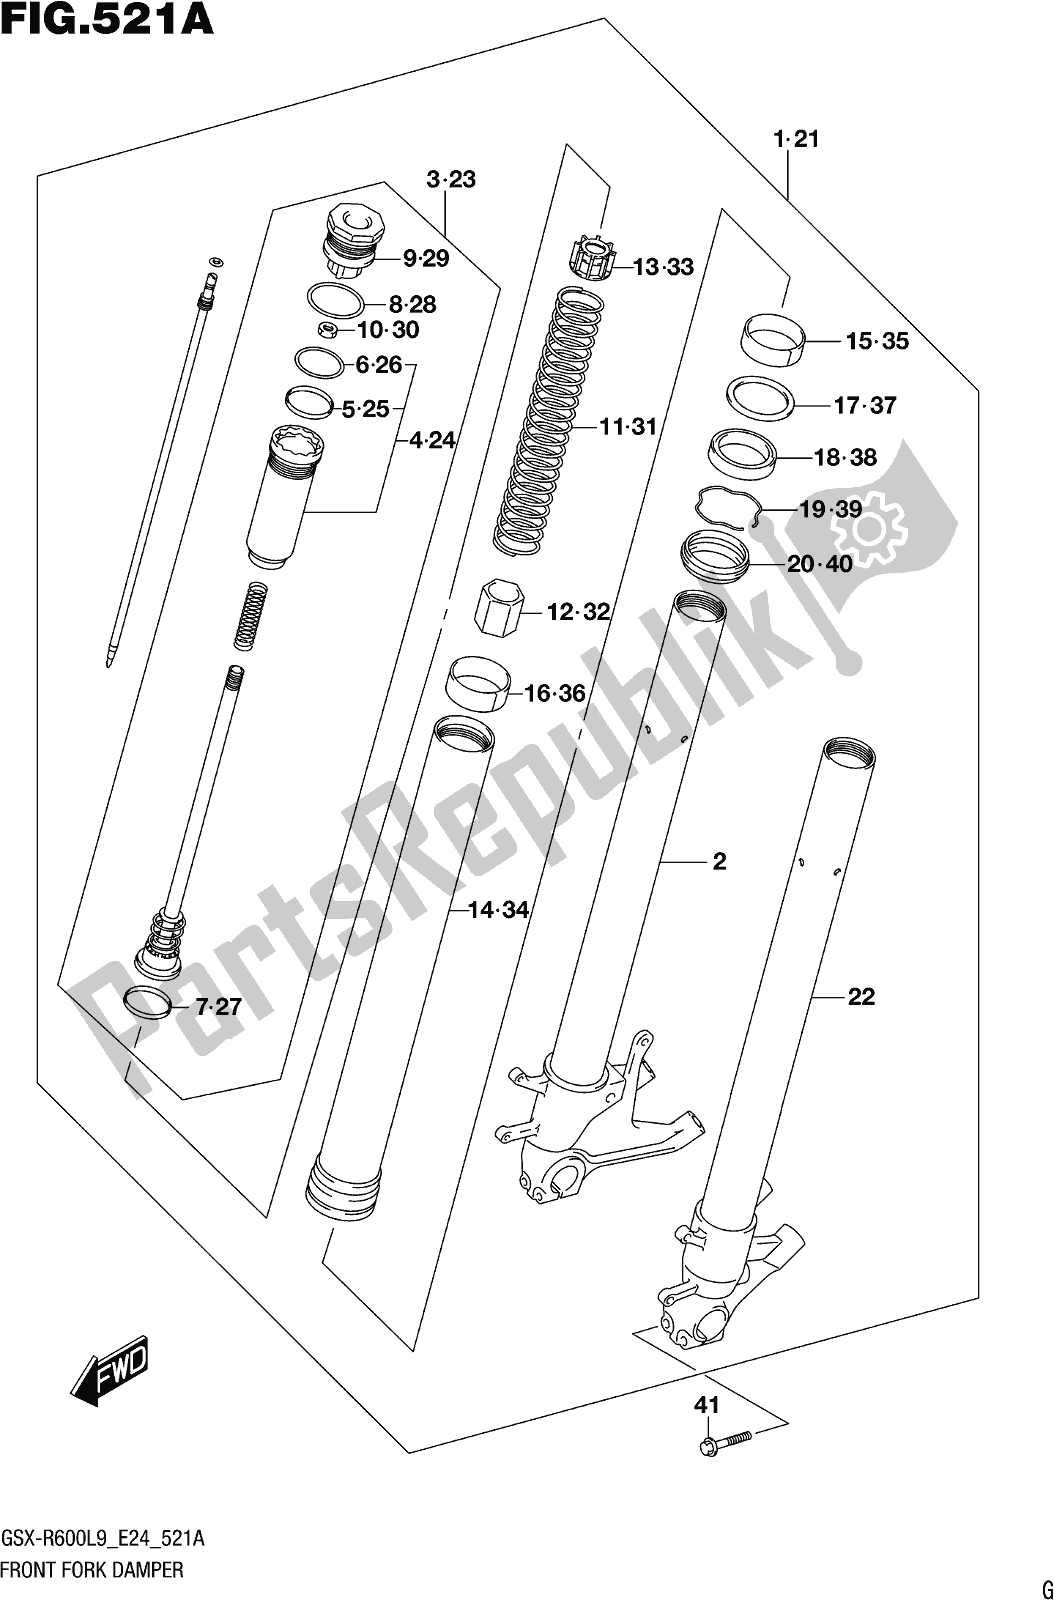 All parts for the Fig. 521a Front Fork Damper of the Suzuki Gsx-r 600 2019